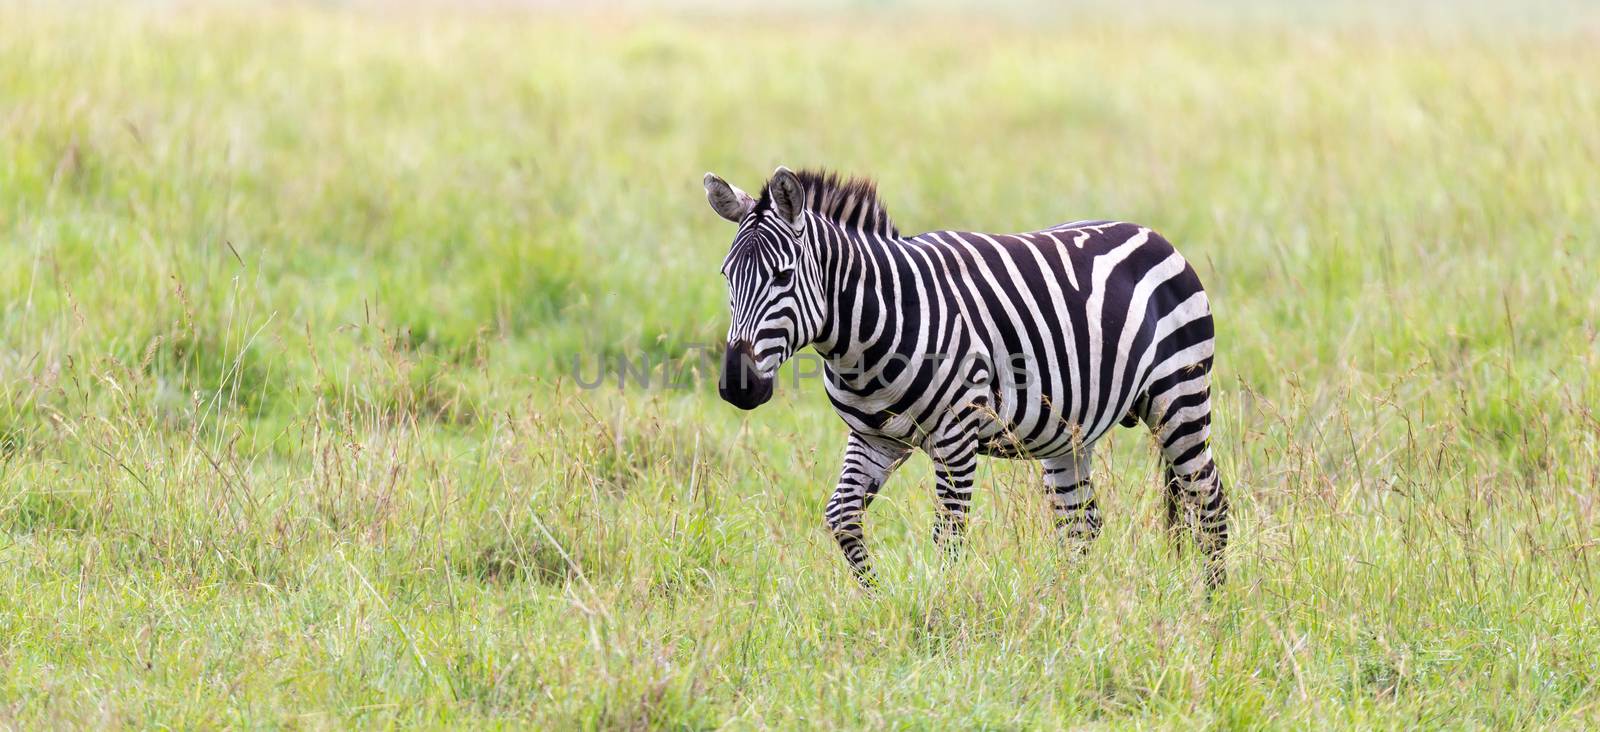 A Zebra family grazes in the savanna in close proximity to other by 25ehaag6